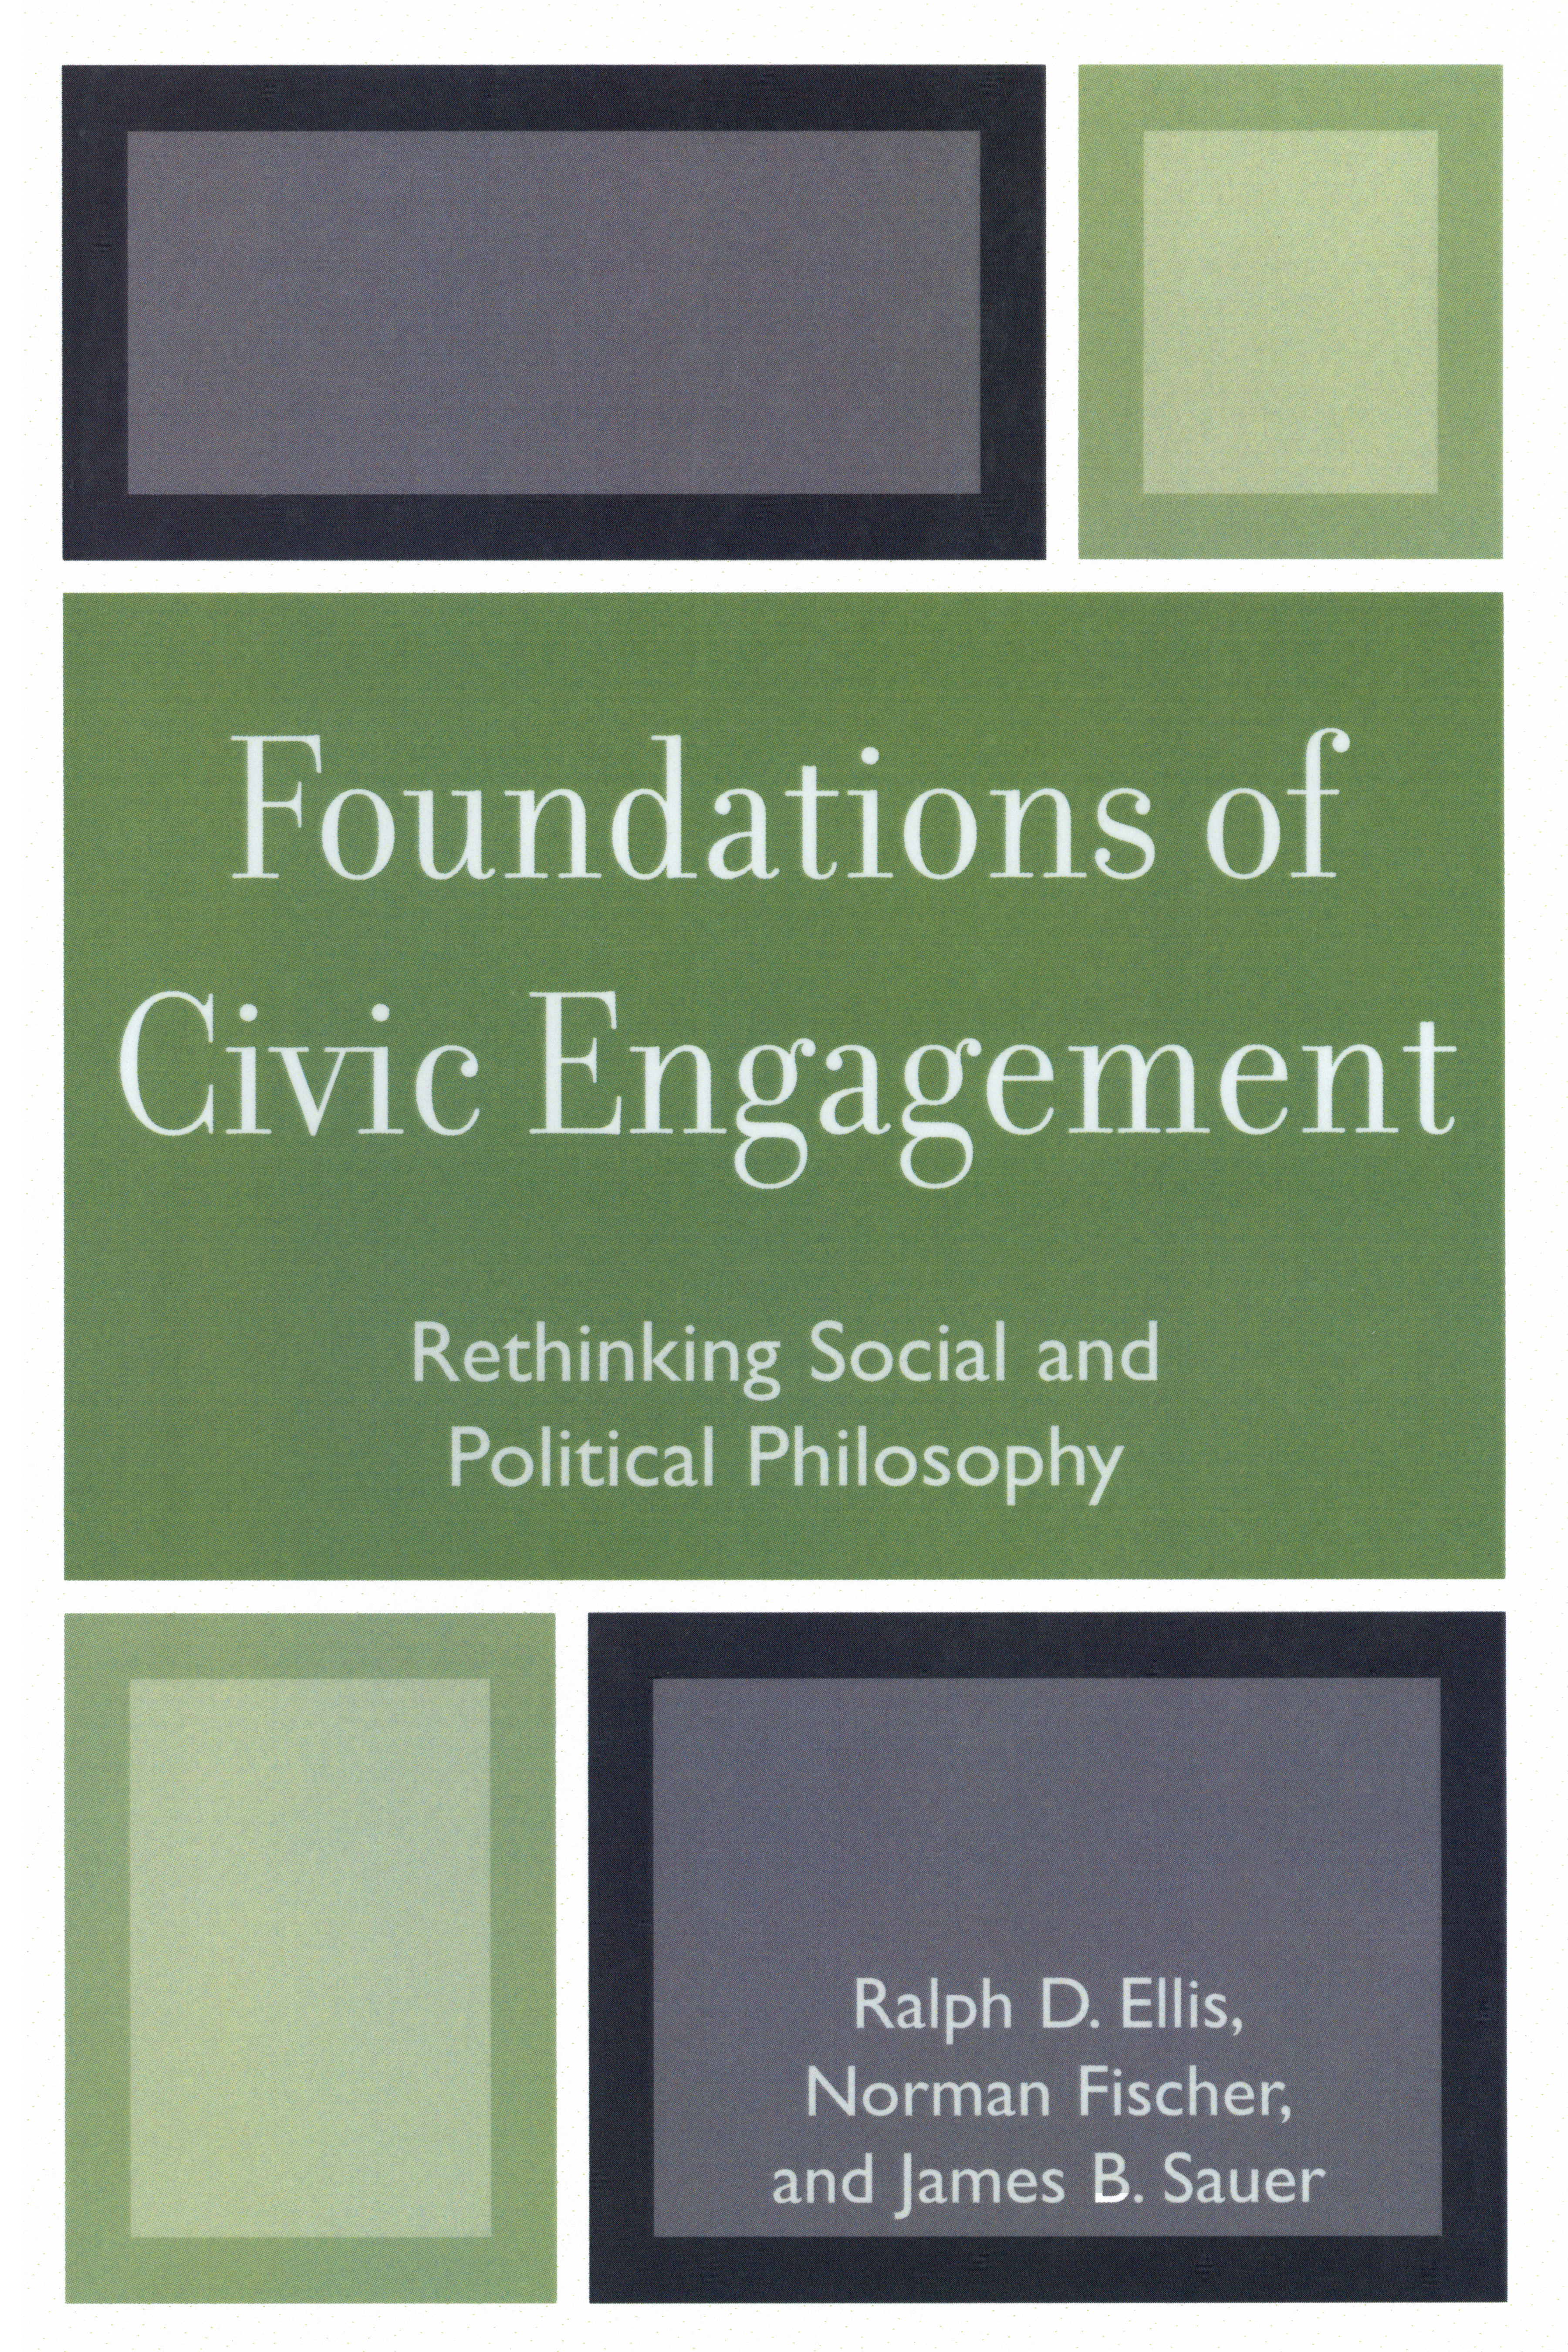 Foundations of Civic Engagement: Rethinking Social and Political Philosophy